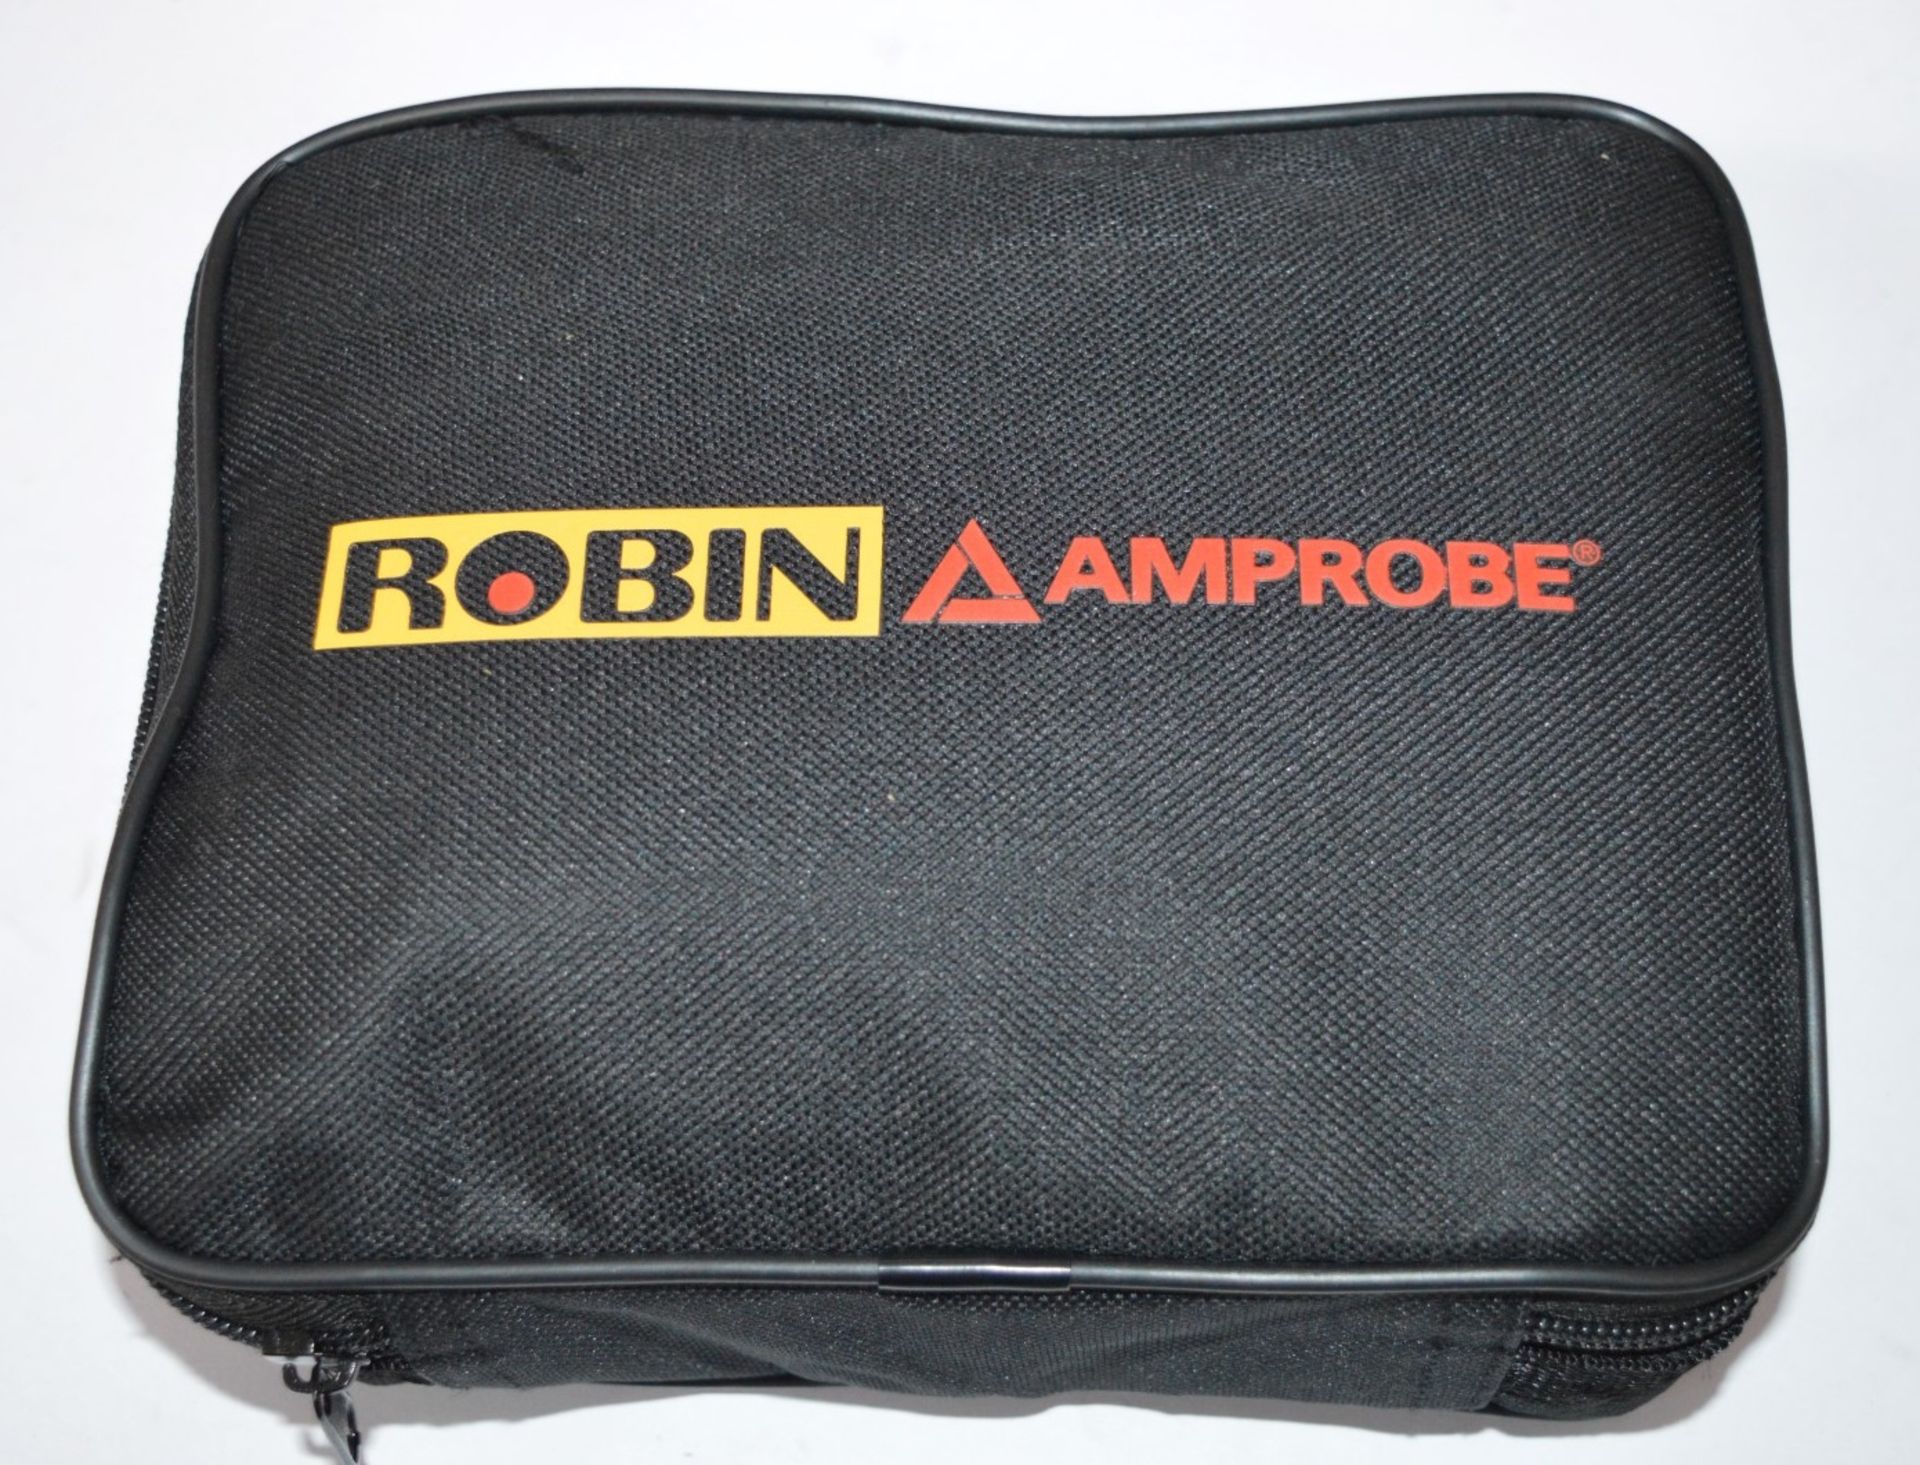 1 x Robin Amprobe Digital RCD Tester Wth Fast Trip - Model KMP7020 - Boxed With All Accessories - - Image 5 of 8